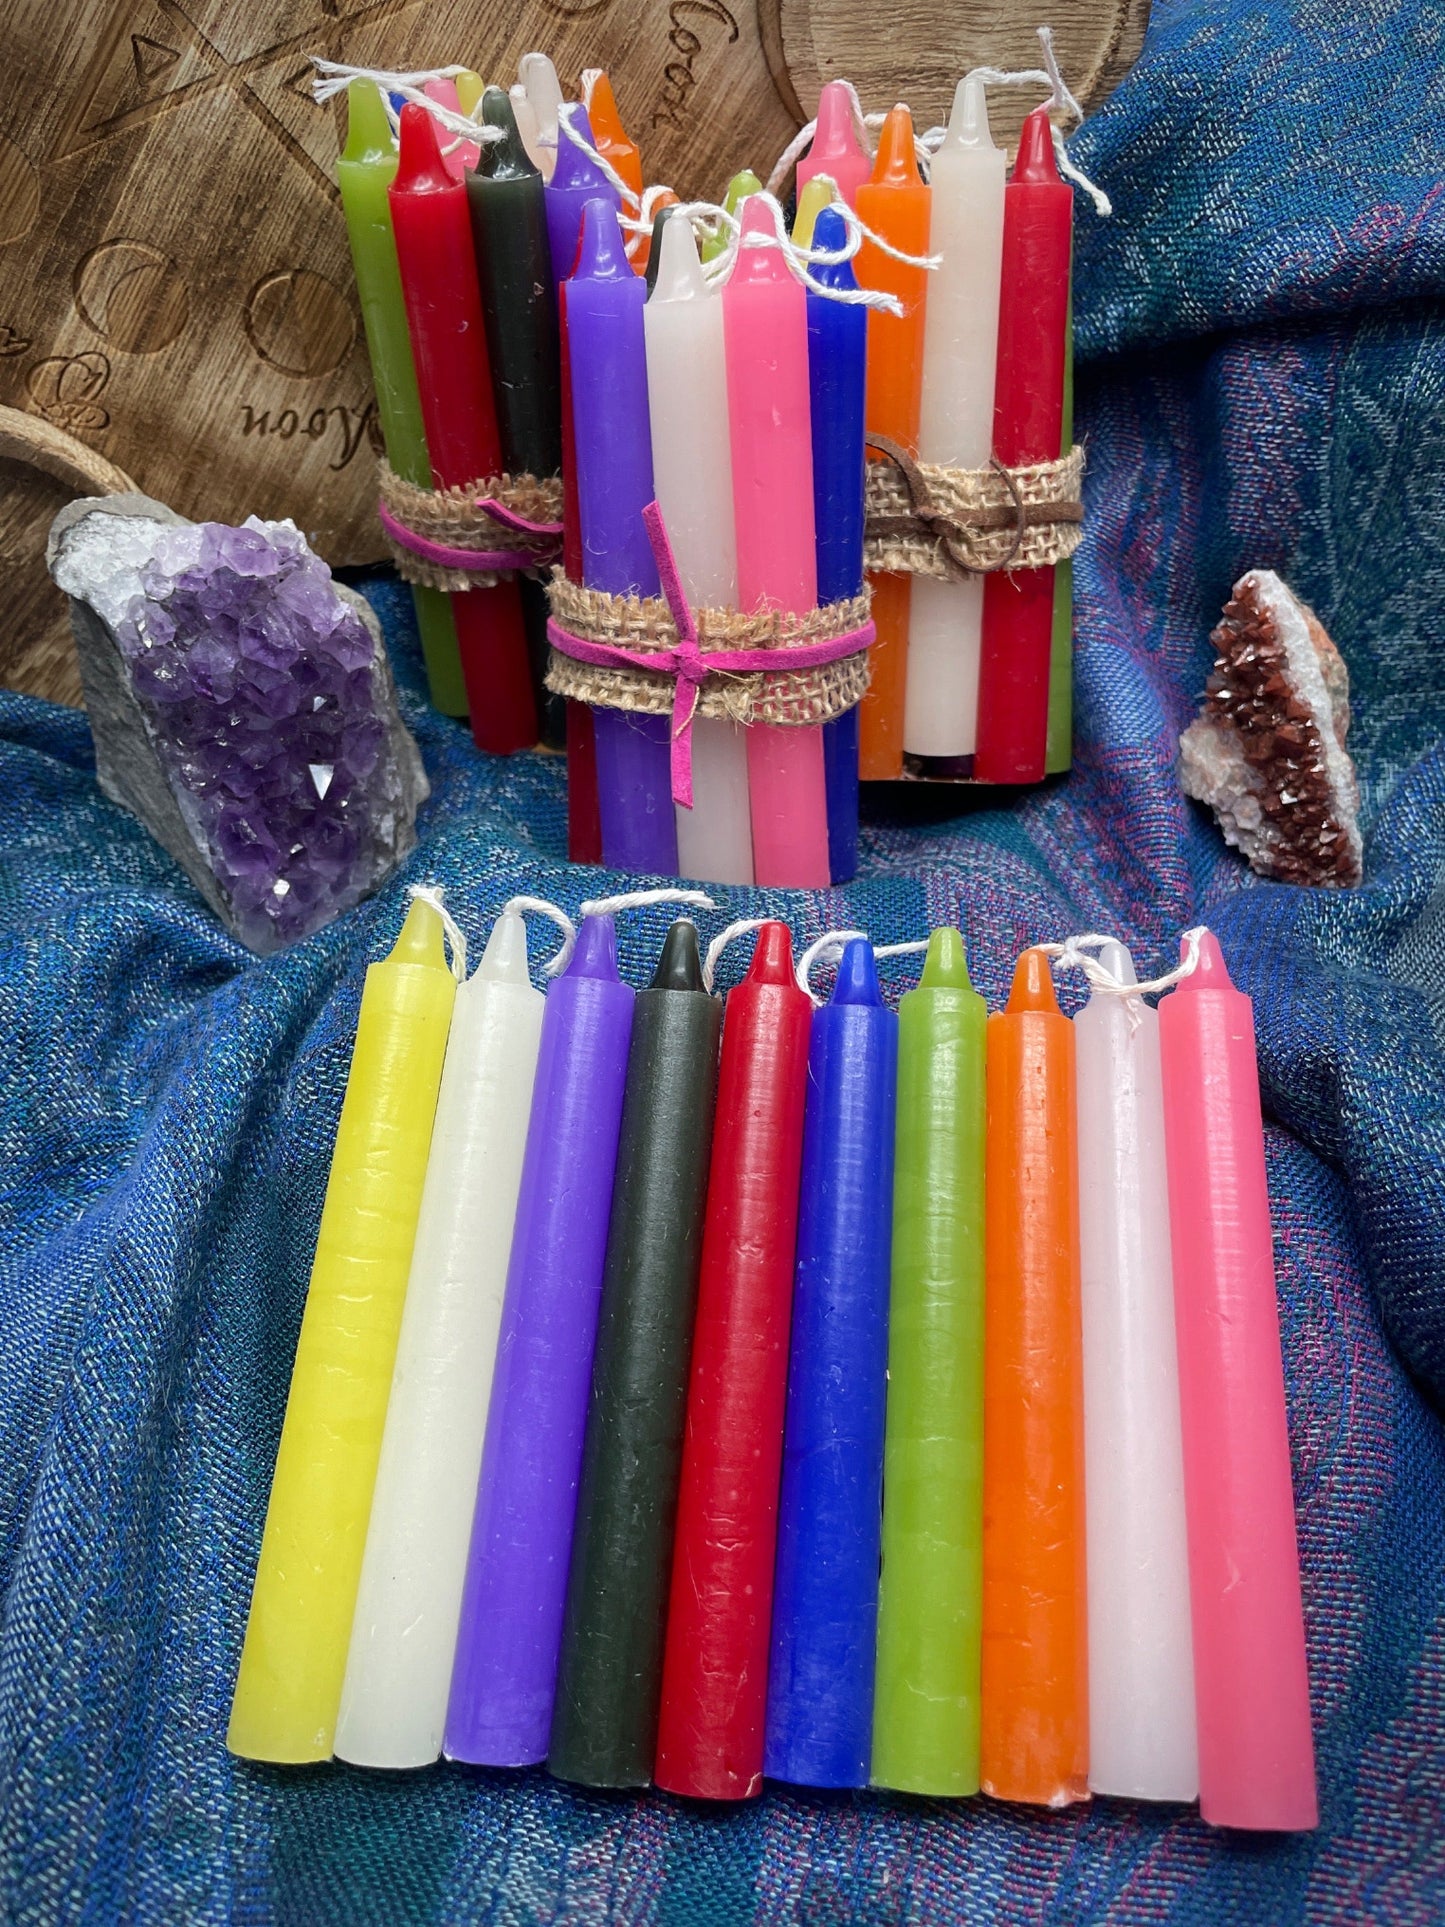 Pictured are various bundles of spell candles or ritual candles.